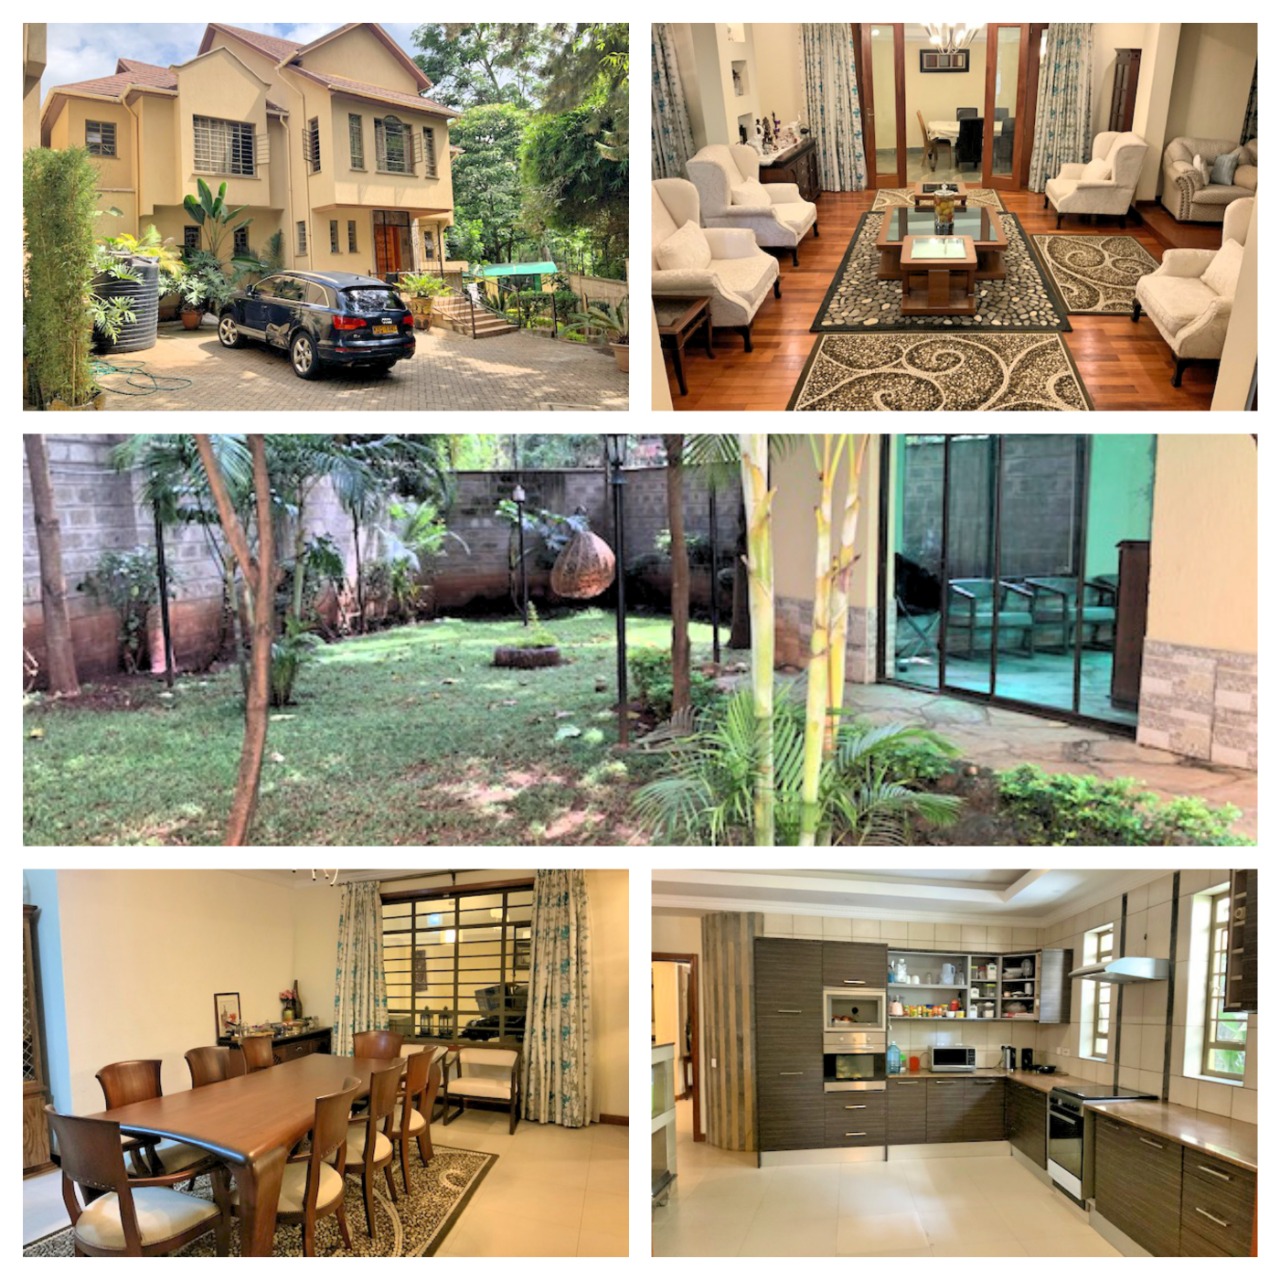 3 Bedroom Townhouse in Gated Community for Rent at Ksh300k on Peponi Rd with Large living, Dinning, Open large Kitchen. Spacious Bedrooms and Private garden13